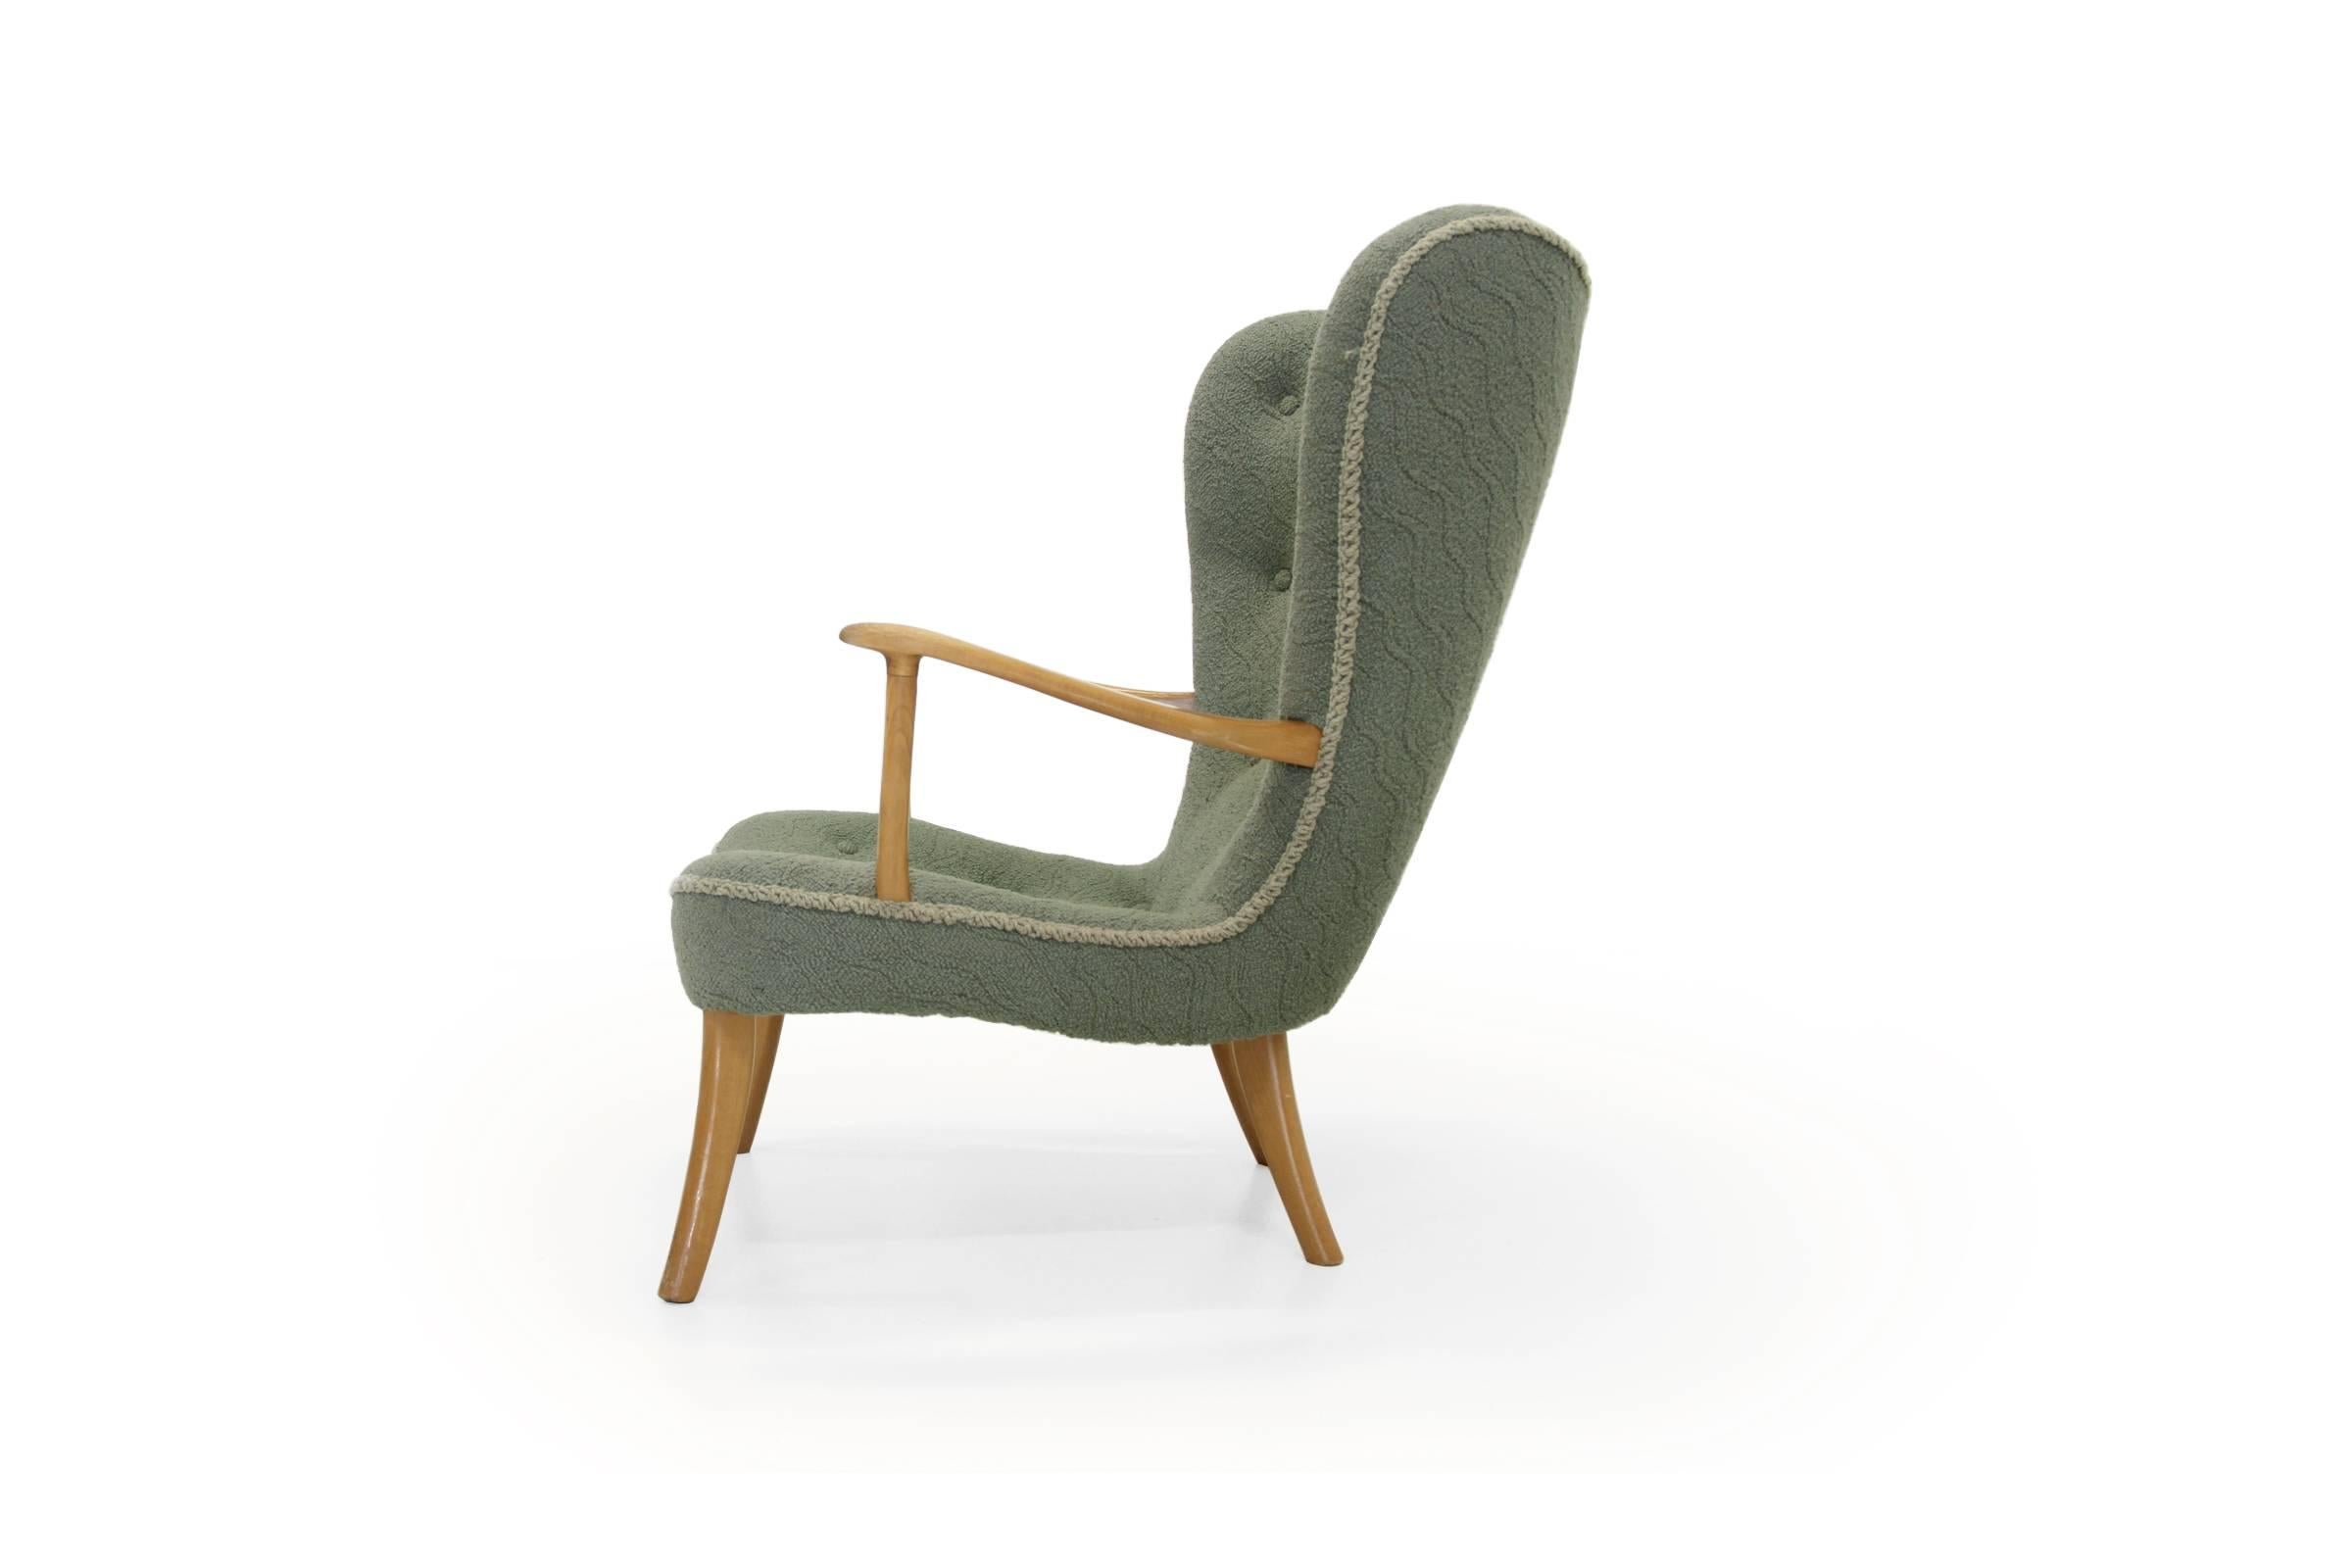 Beautiful and rare lounge chair on a beech frame and original upholstery. Designed by Acton Schubell and Ib Madsen from 1954. The chair is in excellent vintage condition.